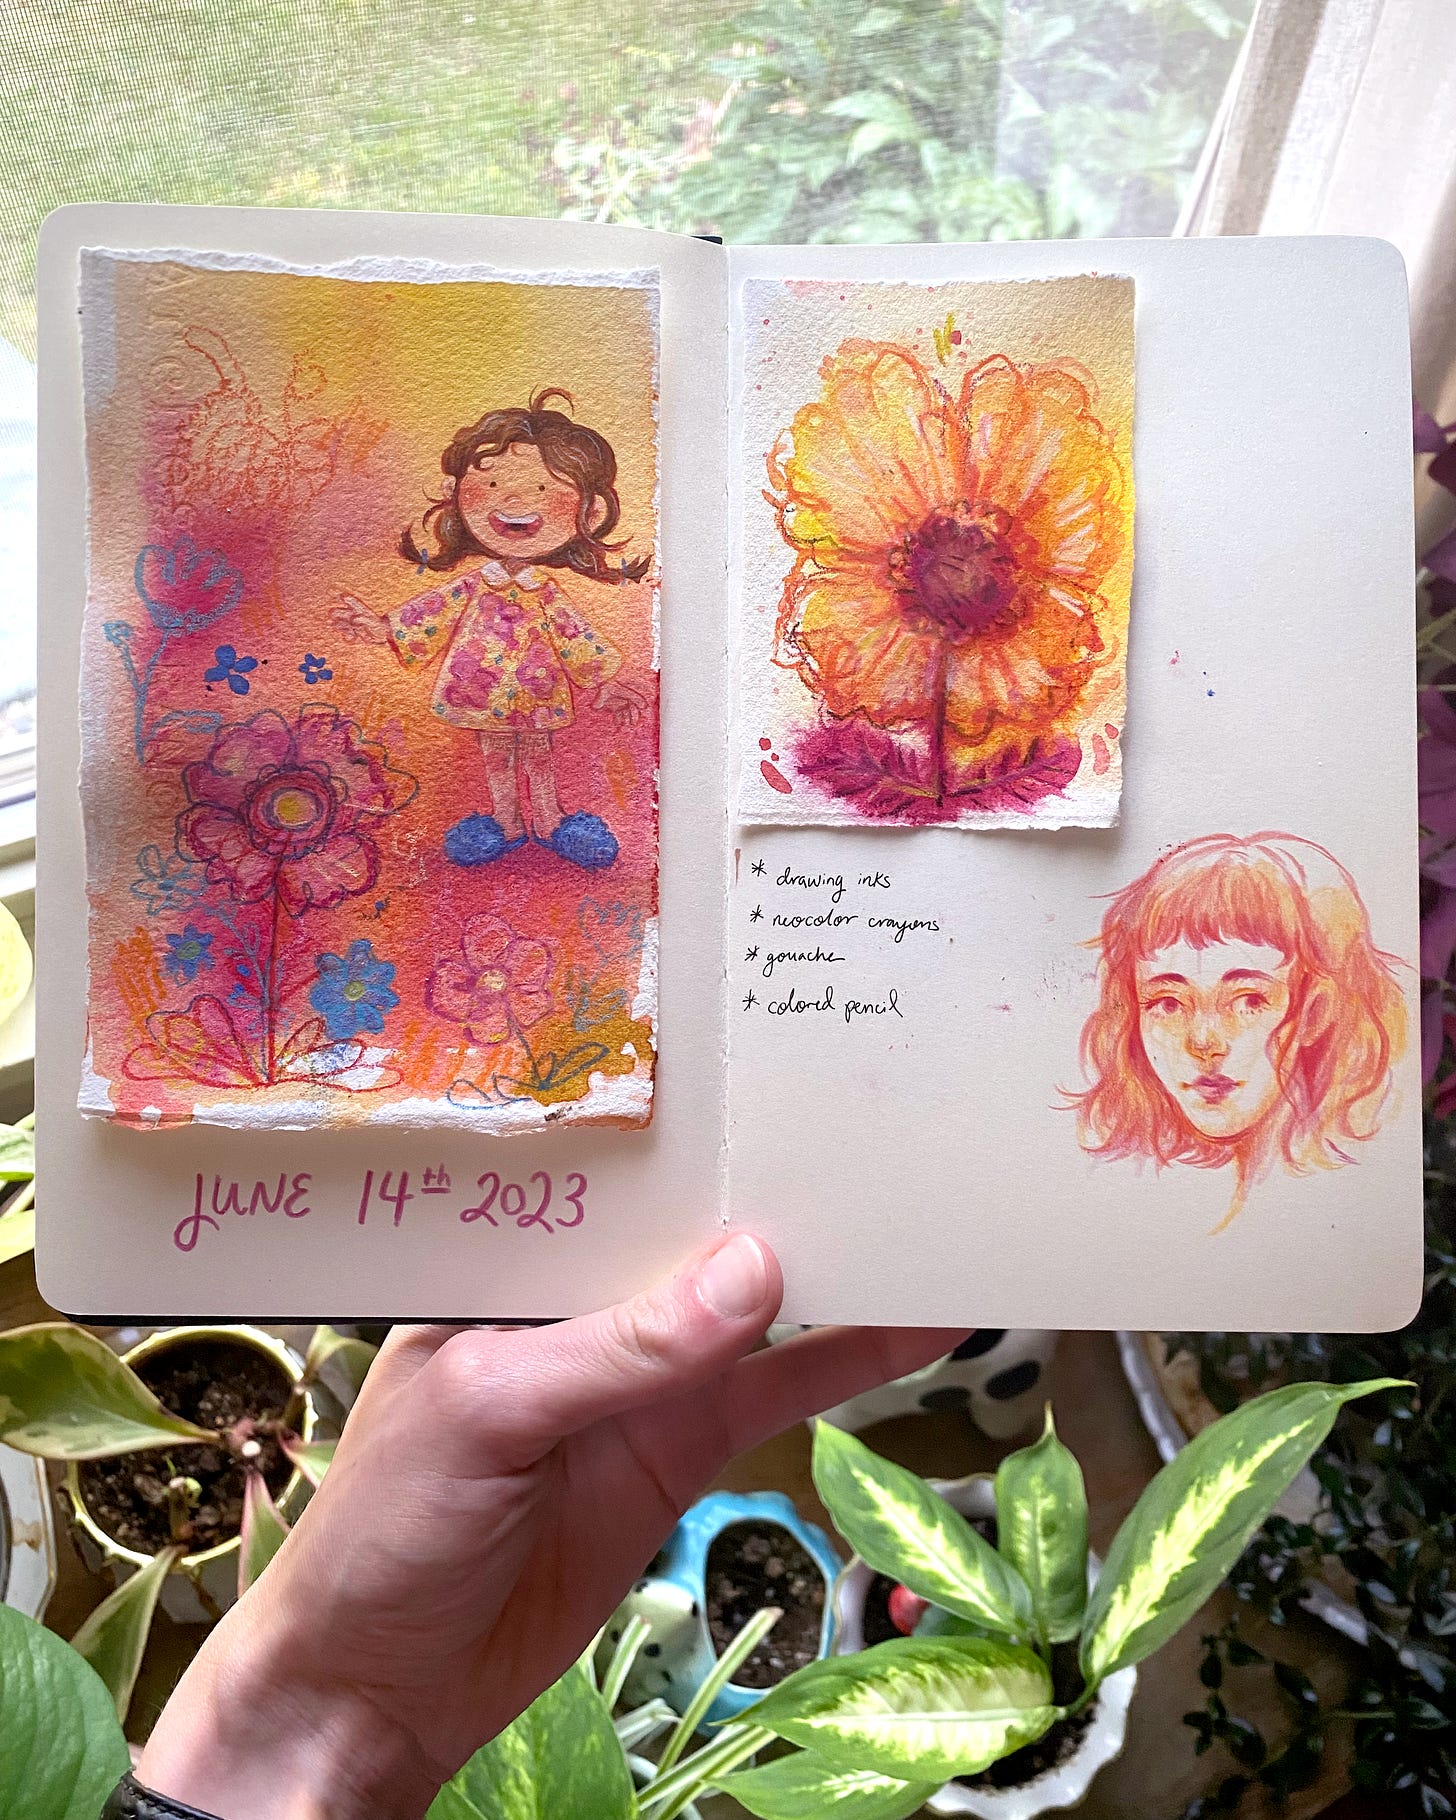 The illustrator holds up a spread from her sketchbook. The sketches are all done in warm colors, like pink, yellow, orange, and red. 